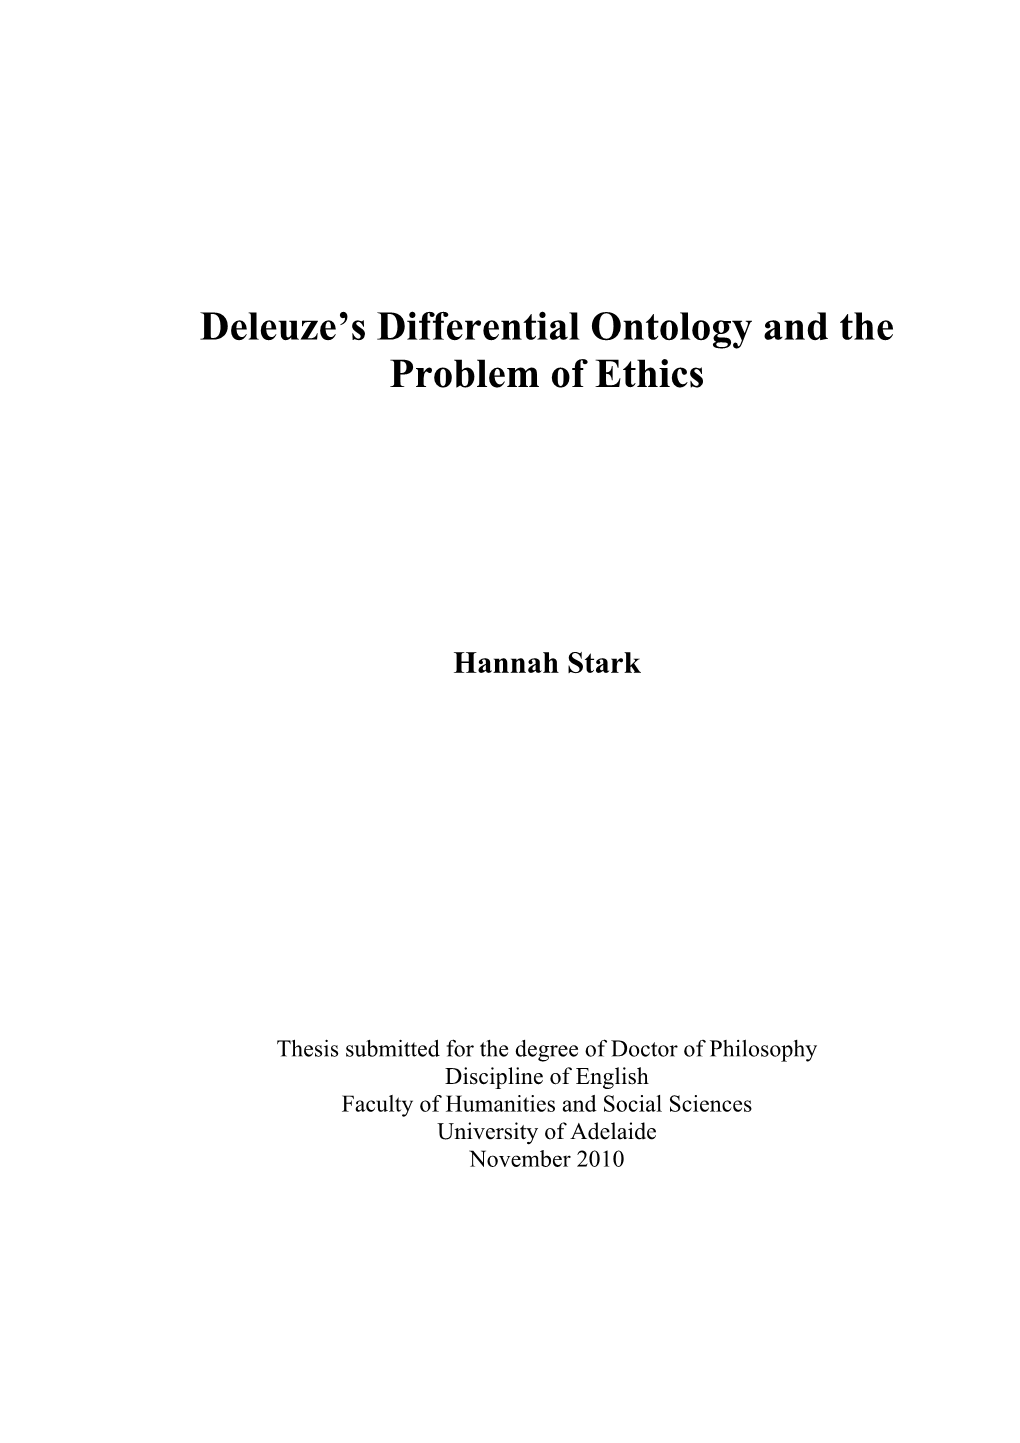 Deleuze's Differential Ontology and the Problem of Ethics